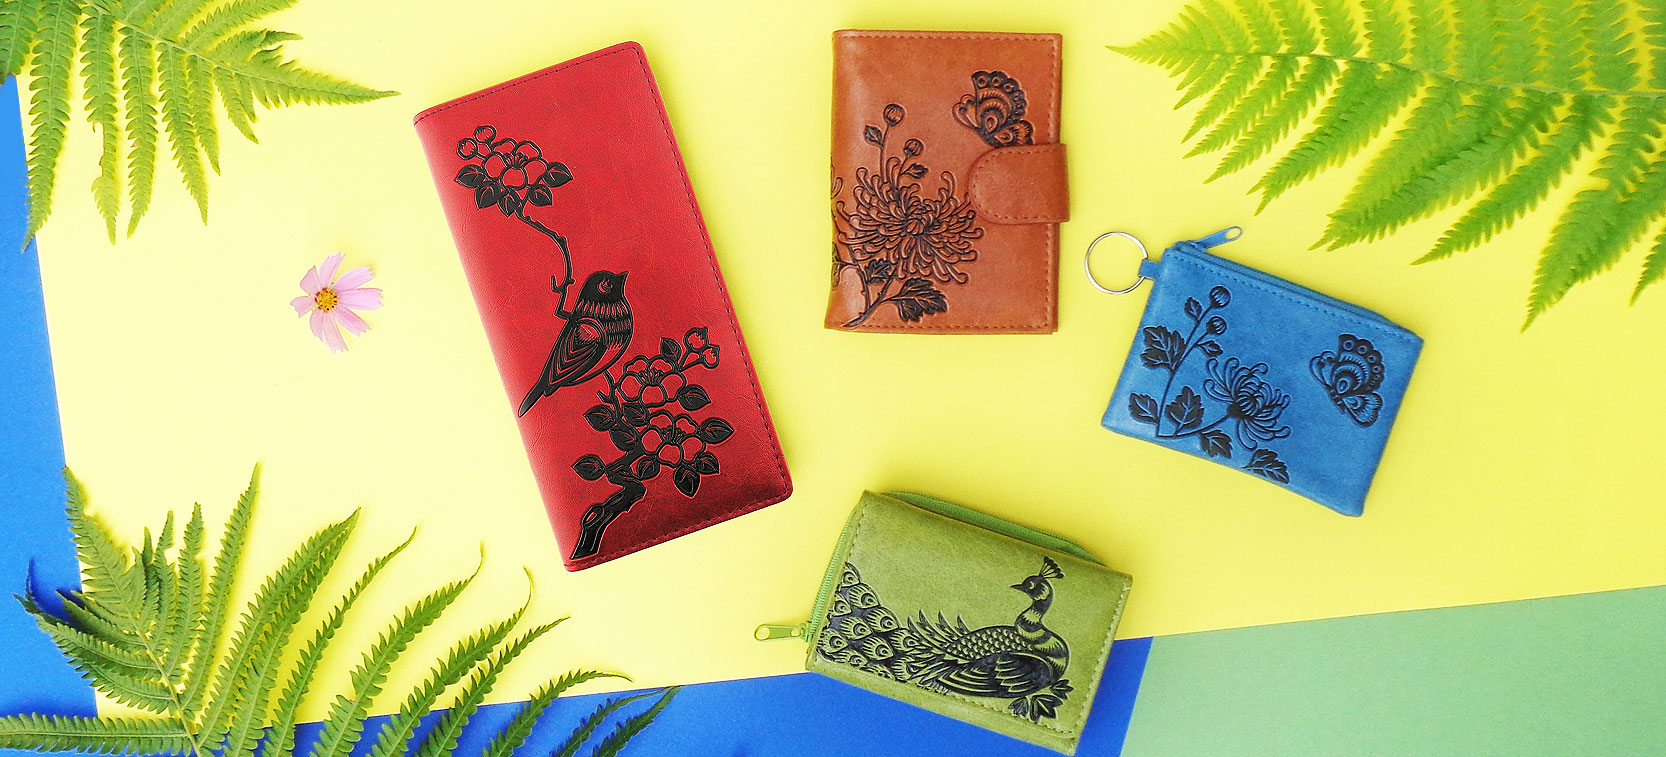 LAVISHY Elma collection new designs of embroidered vegan wallets for fall/autumn 2020 season to gift shops, boutiques & book stores in Canada, USA and worldwide.